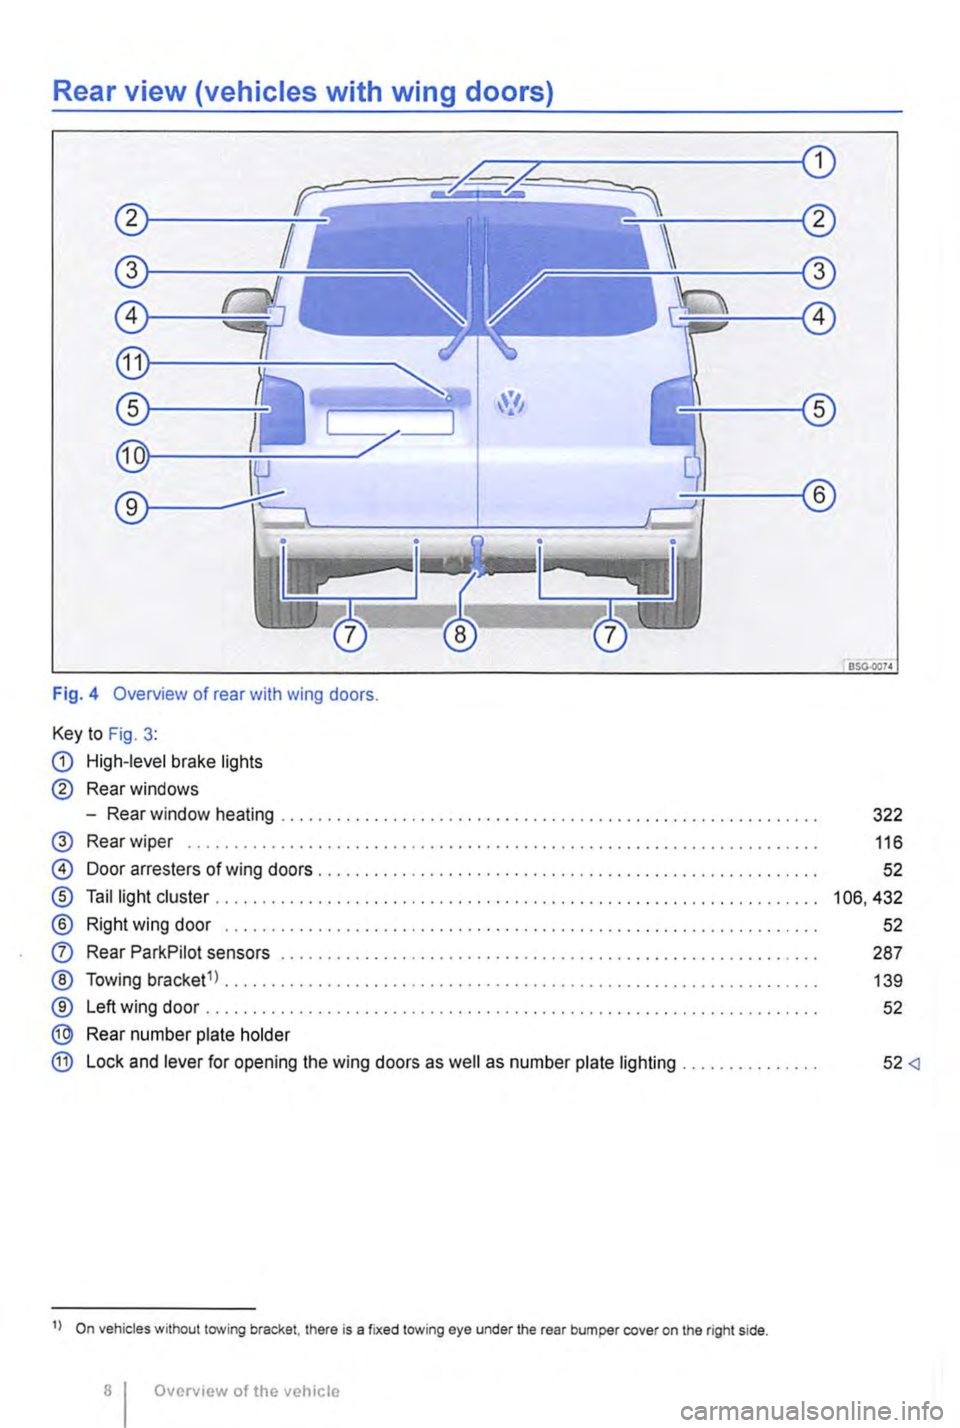 VOLKSWAGEN TRANSPORTER 2011  Owners Manual Rear view (vehicles with wing doors) 
Fig. 4 Overview of rear with wing doors. 
Key to Fig. 3: 
G) High-level brake lights 
® Rear windows 
-Rear window heating ......................................